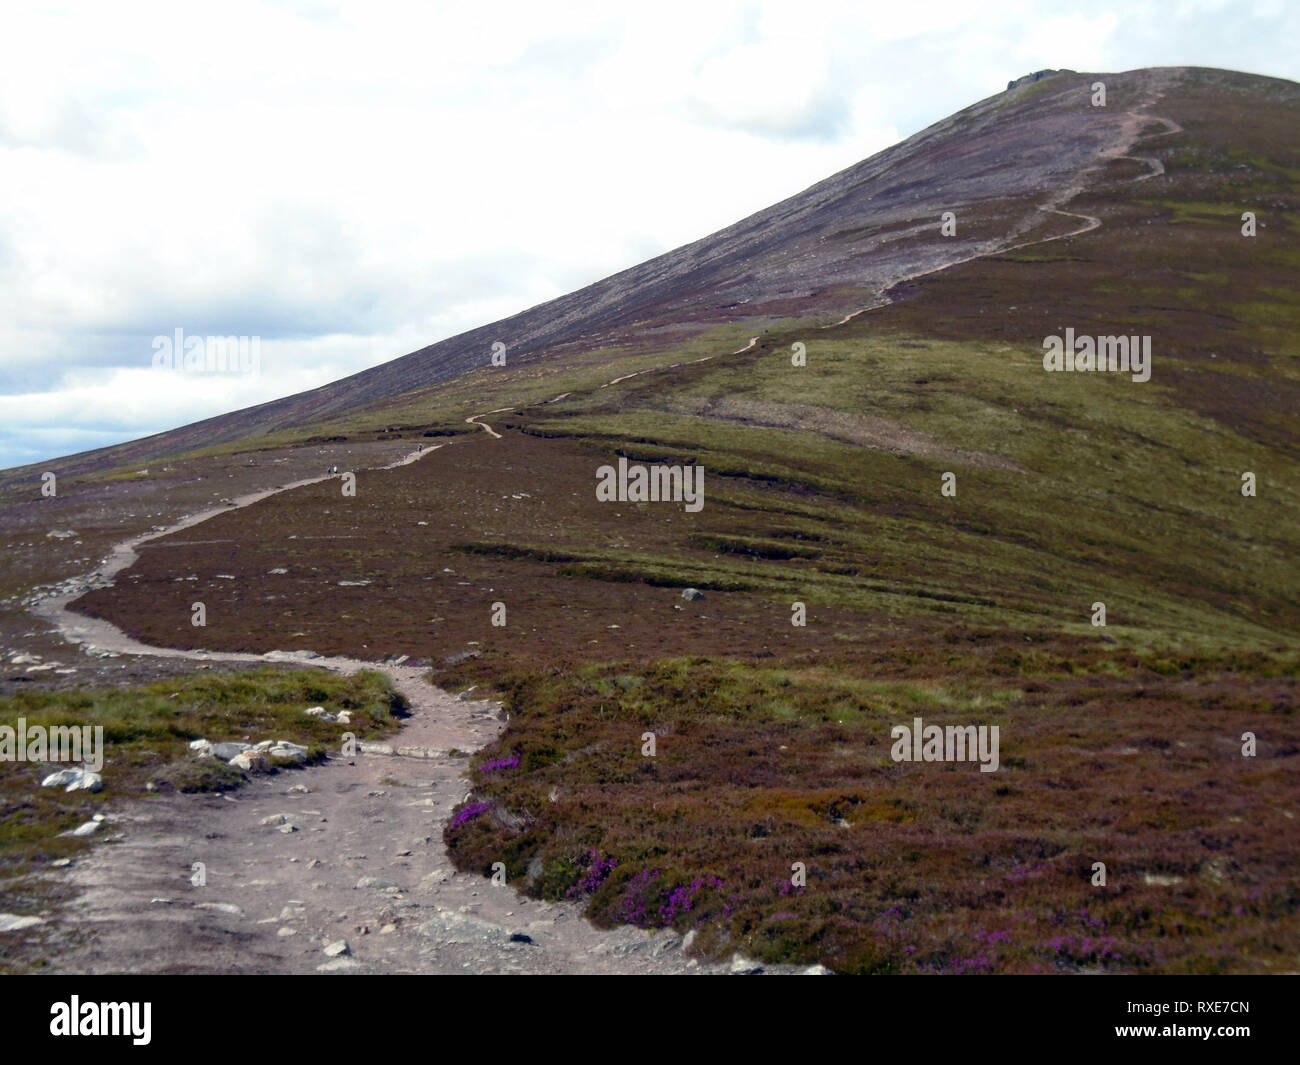 The Path Leading to the Summit of the Scottish Mountain Corbett Ben Rinnes form Roy's Hill in the Cairngorm National Park, Scotland, UK. Stock Photo